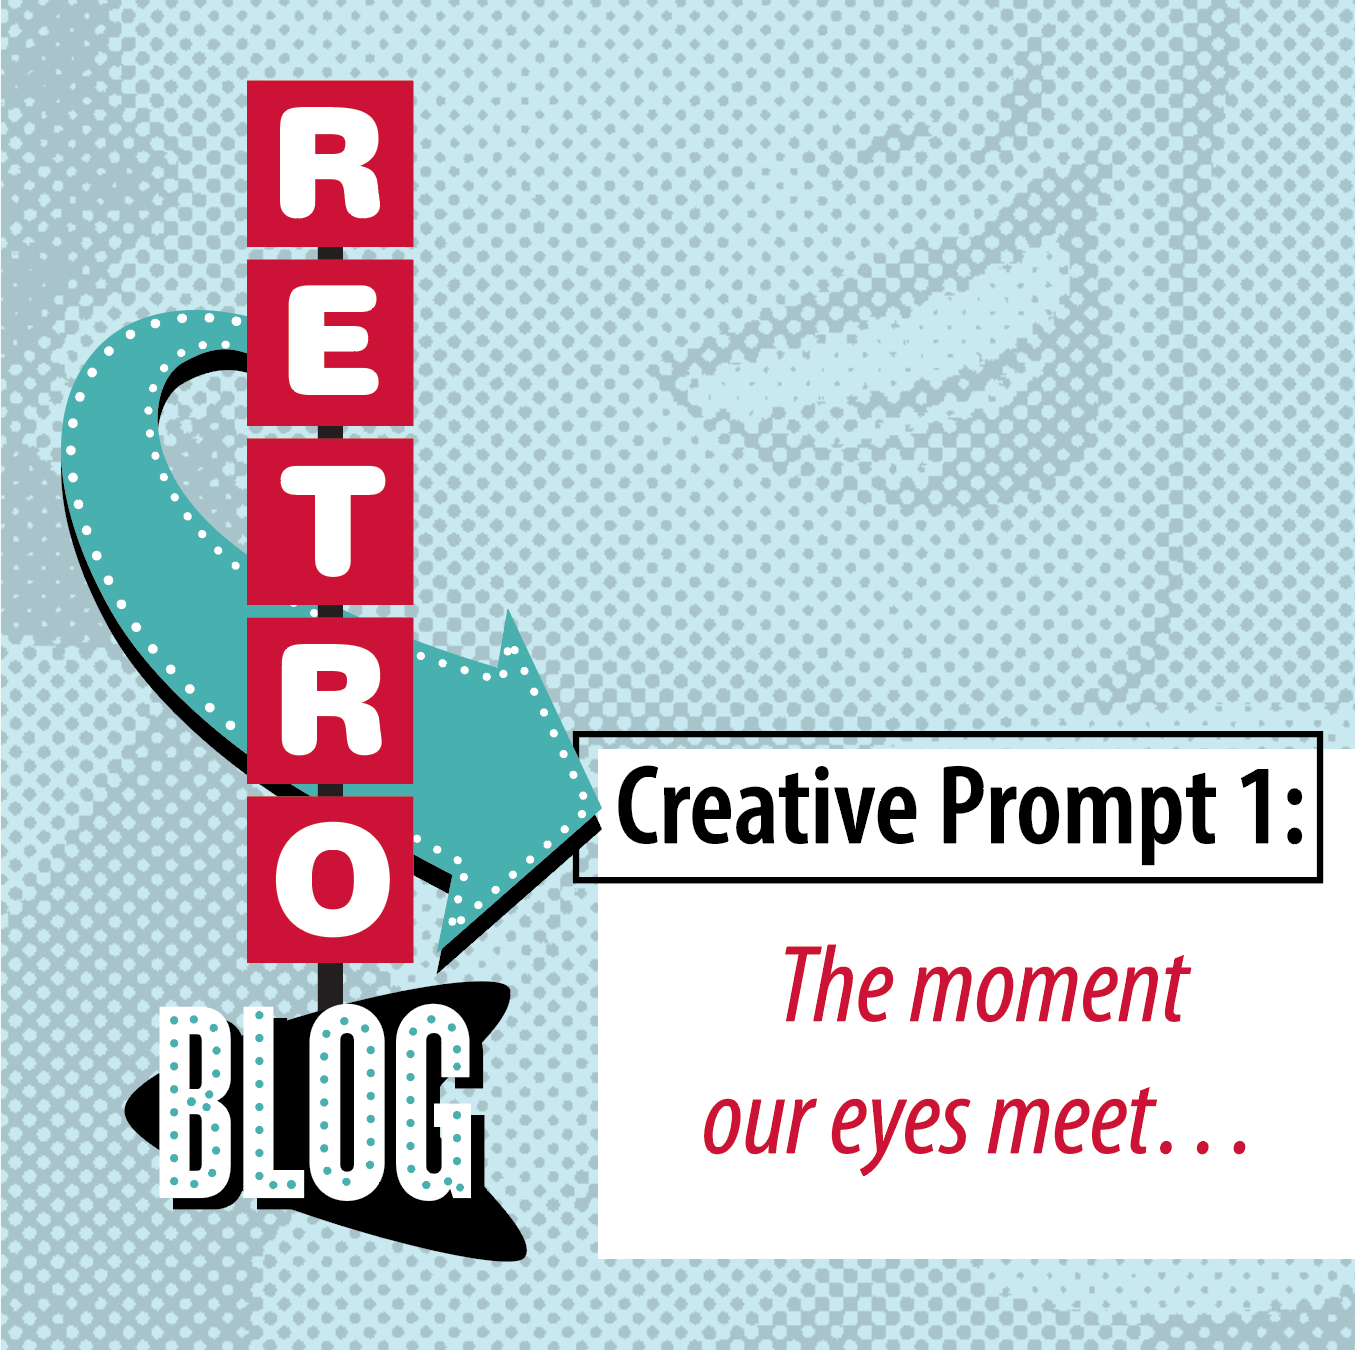 Welcome to the Blog + Creative Prompt 1